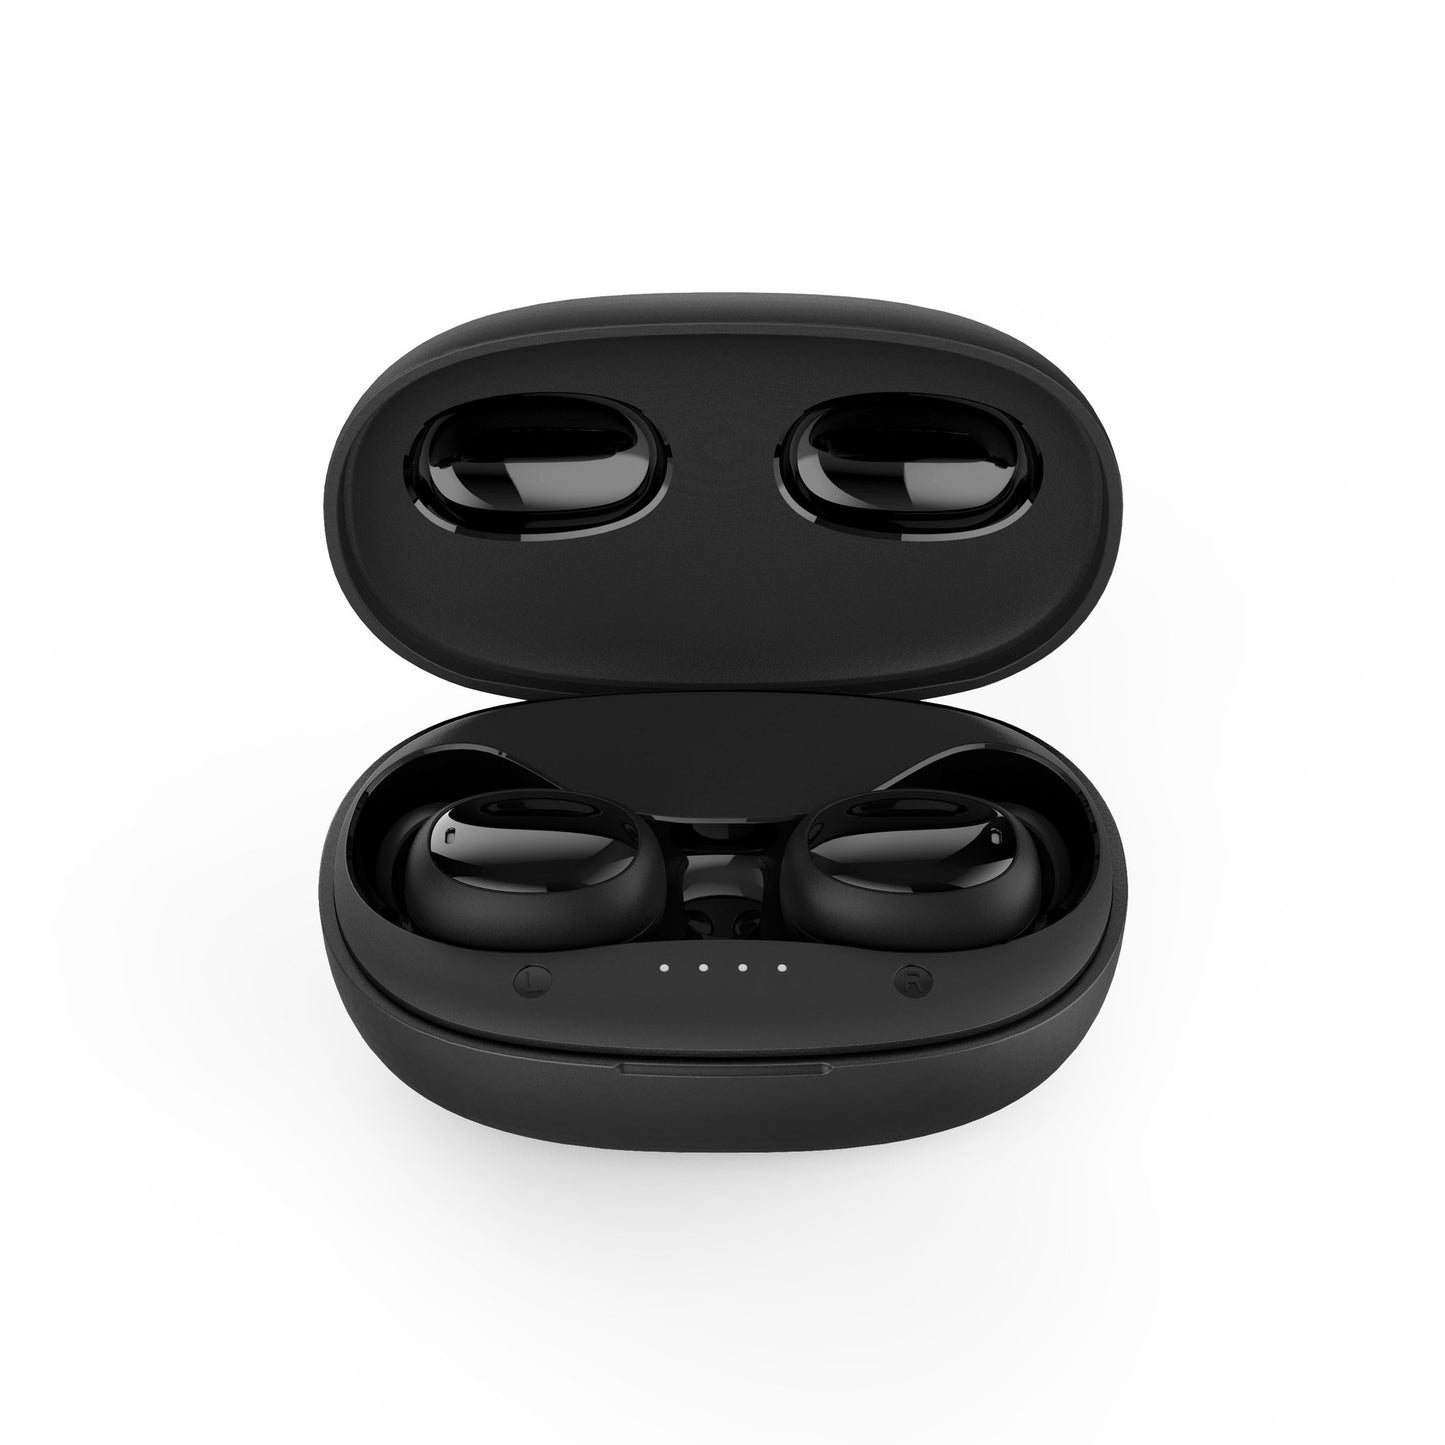 SKEIPODS E65 TRUE WIRELESS STEREO BT EARBUDS